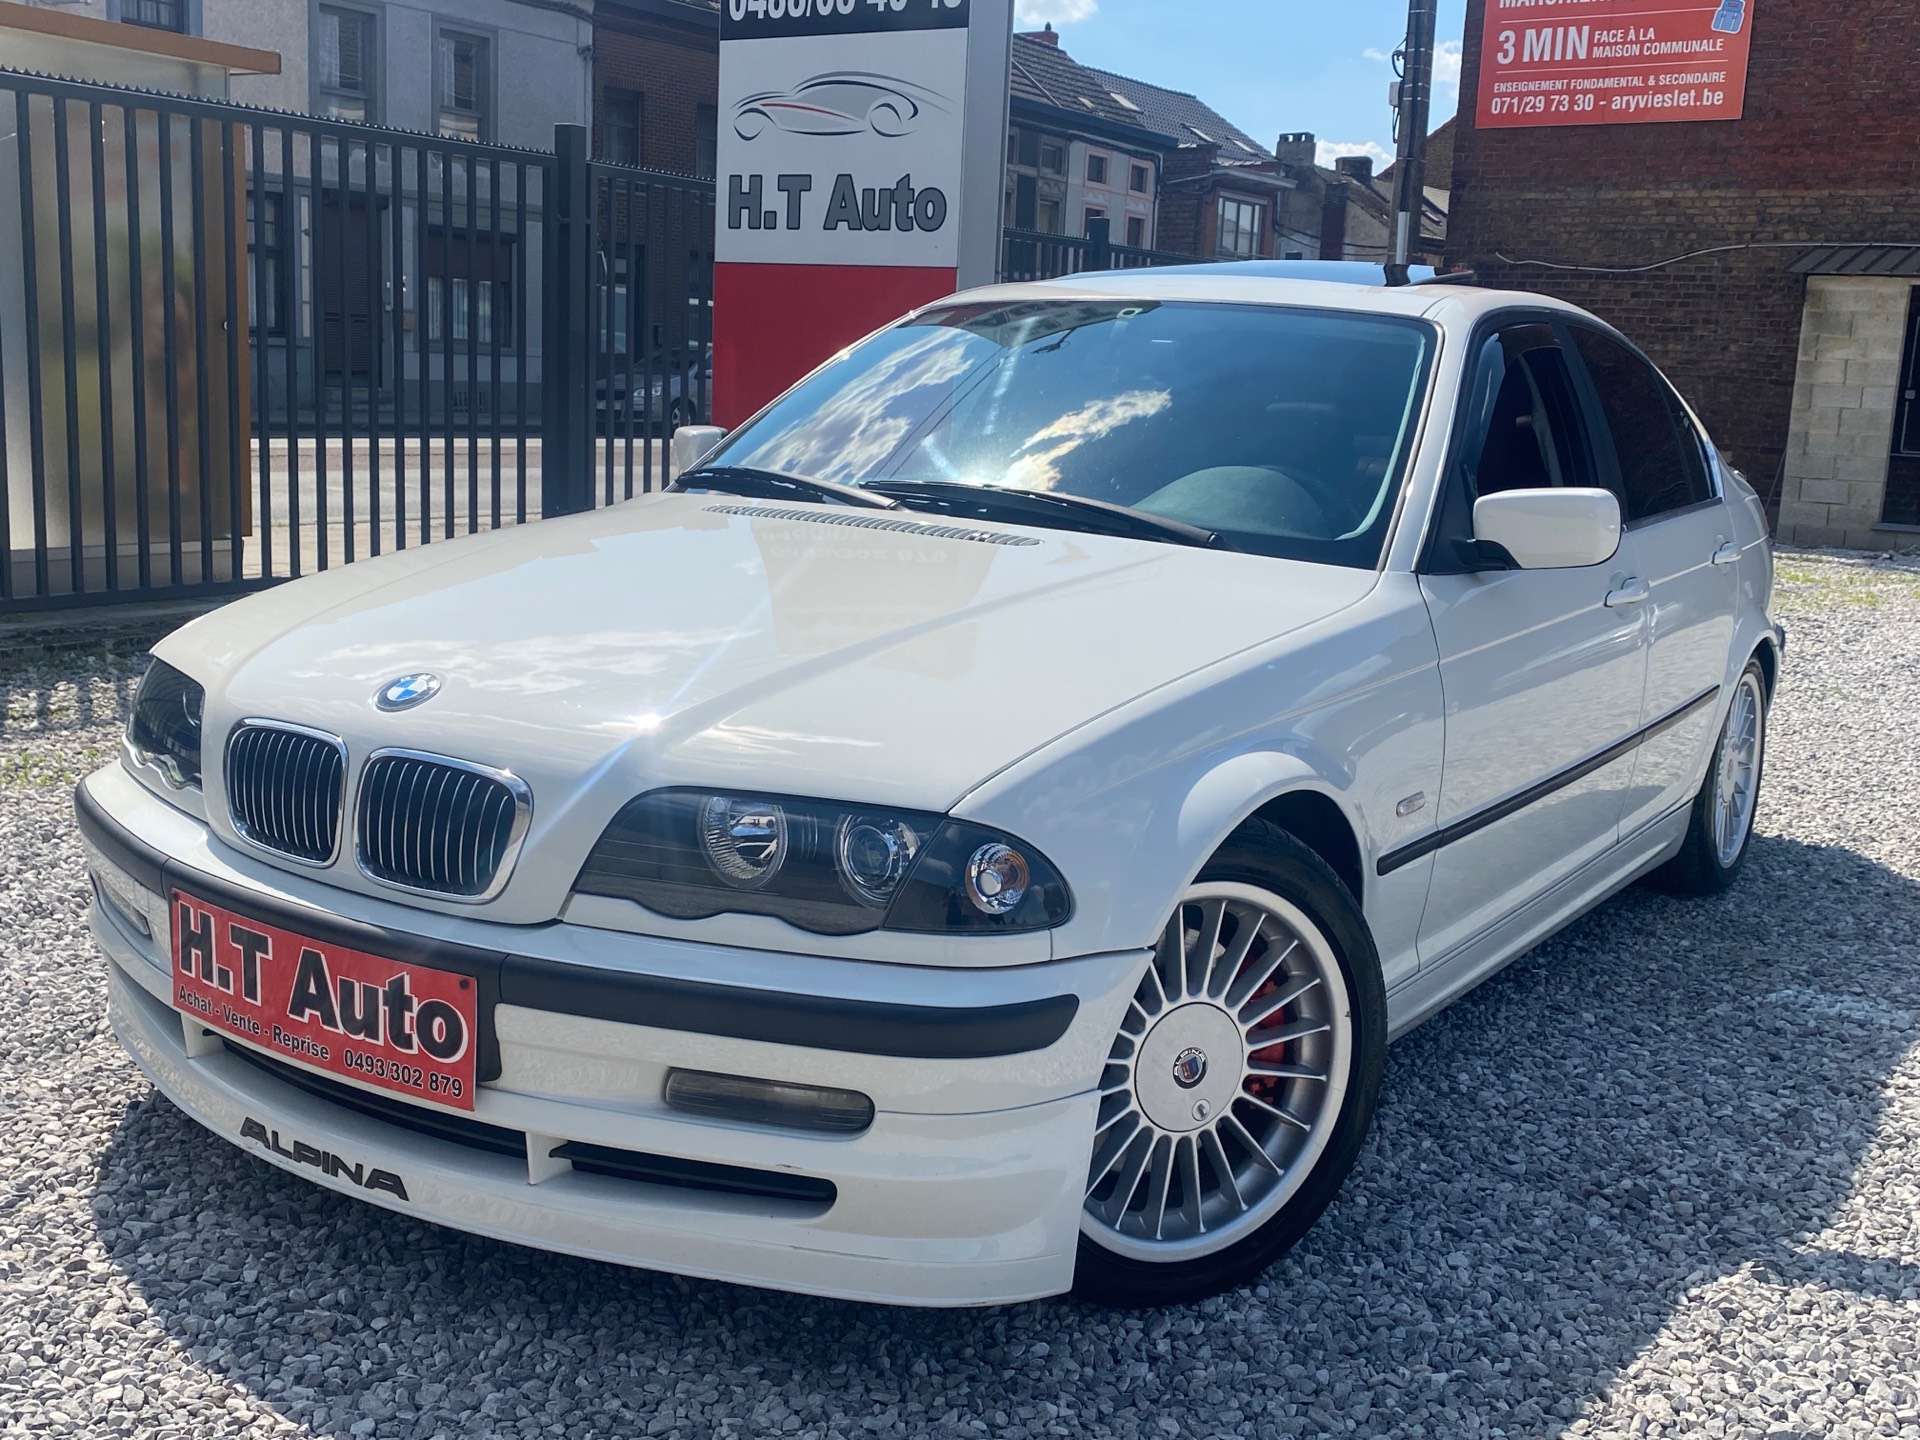 Alpina B3 Sedan in White used in Marchienne au pont for € 19,500.-